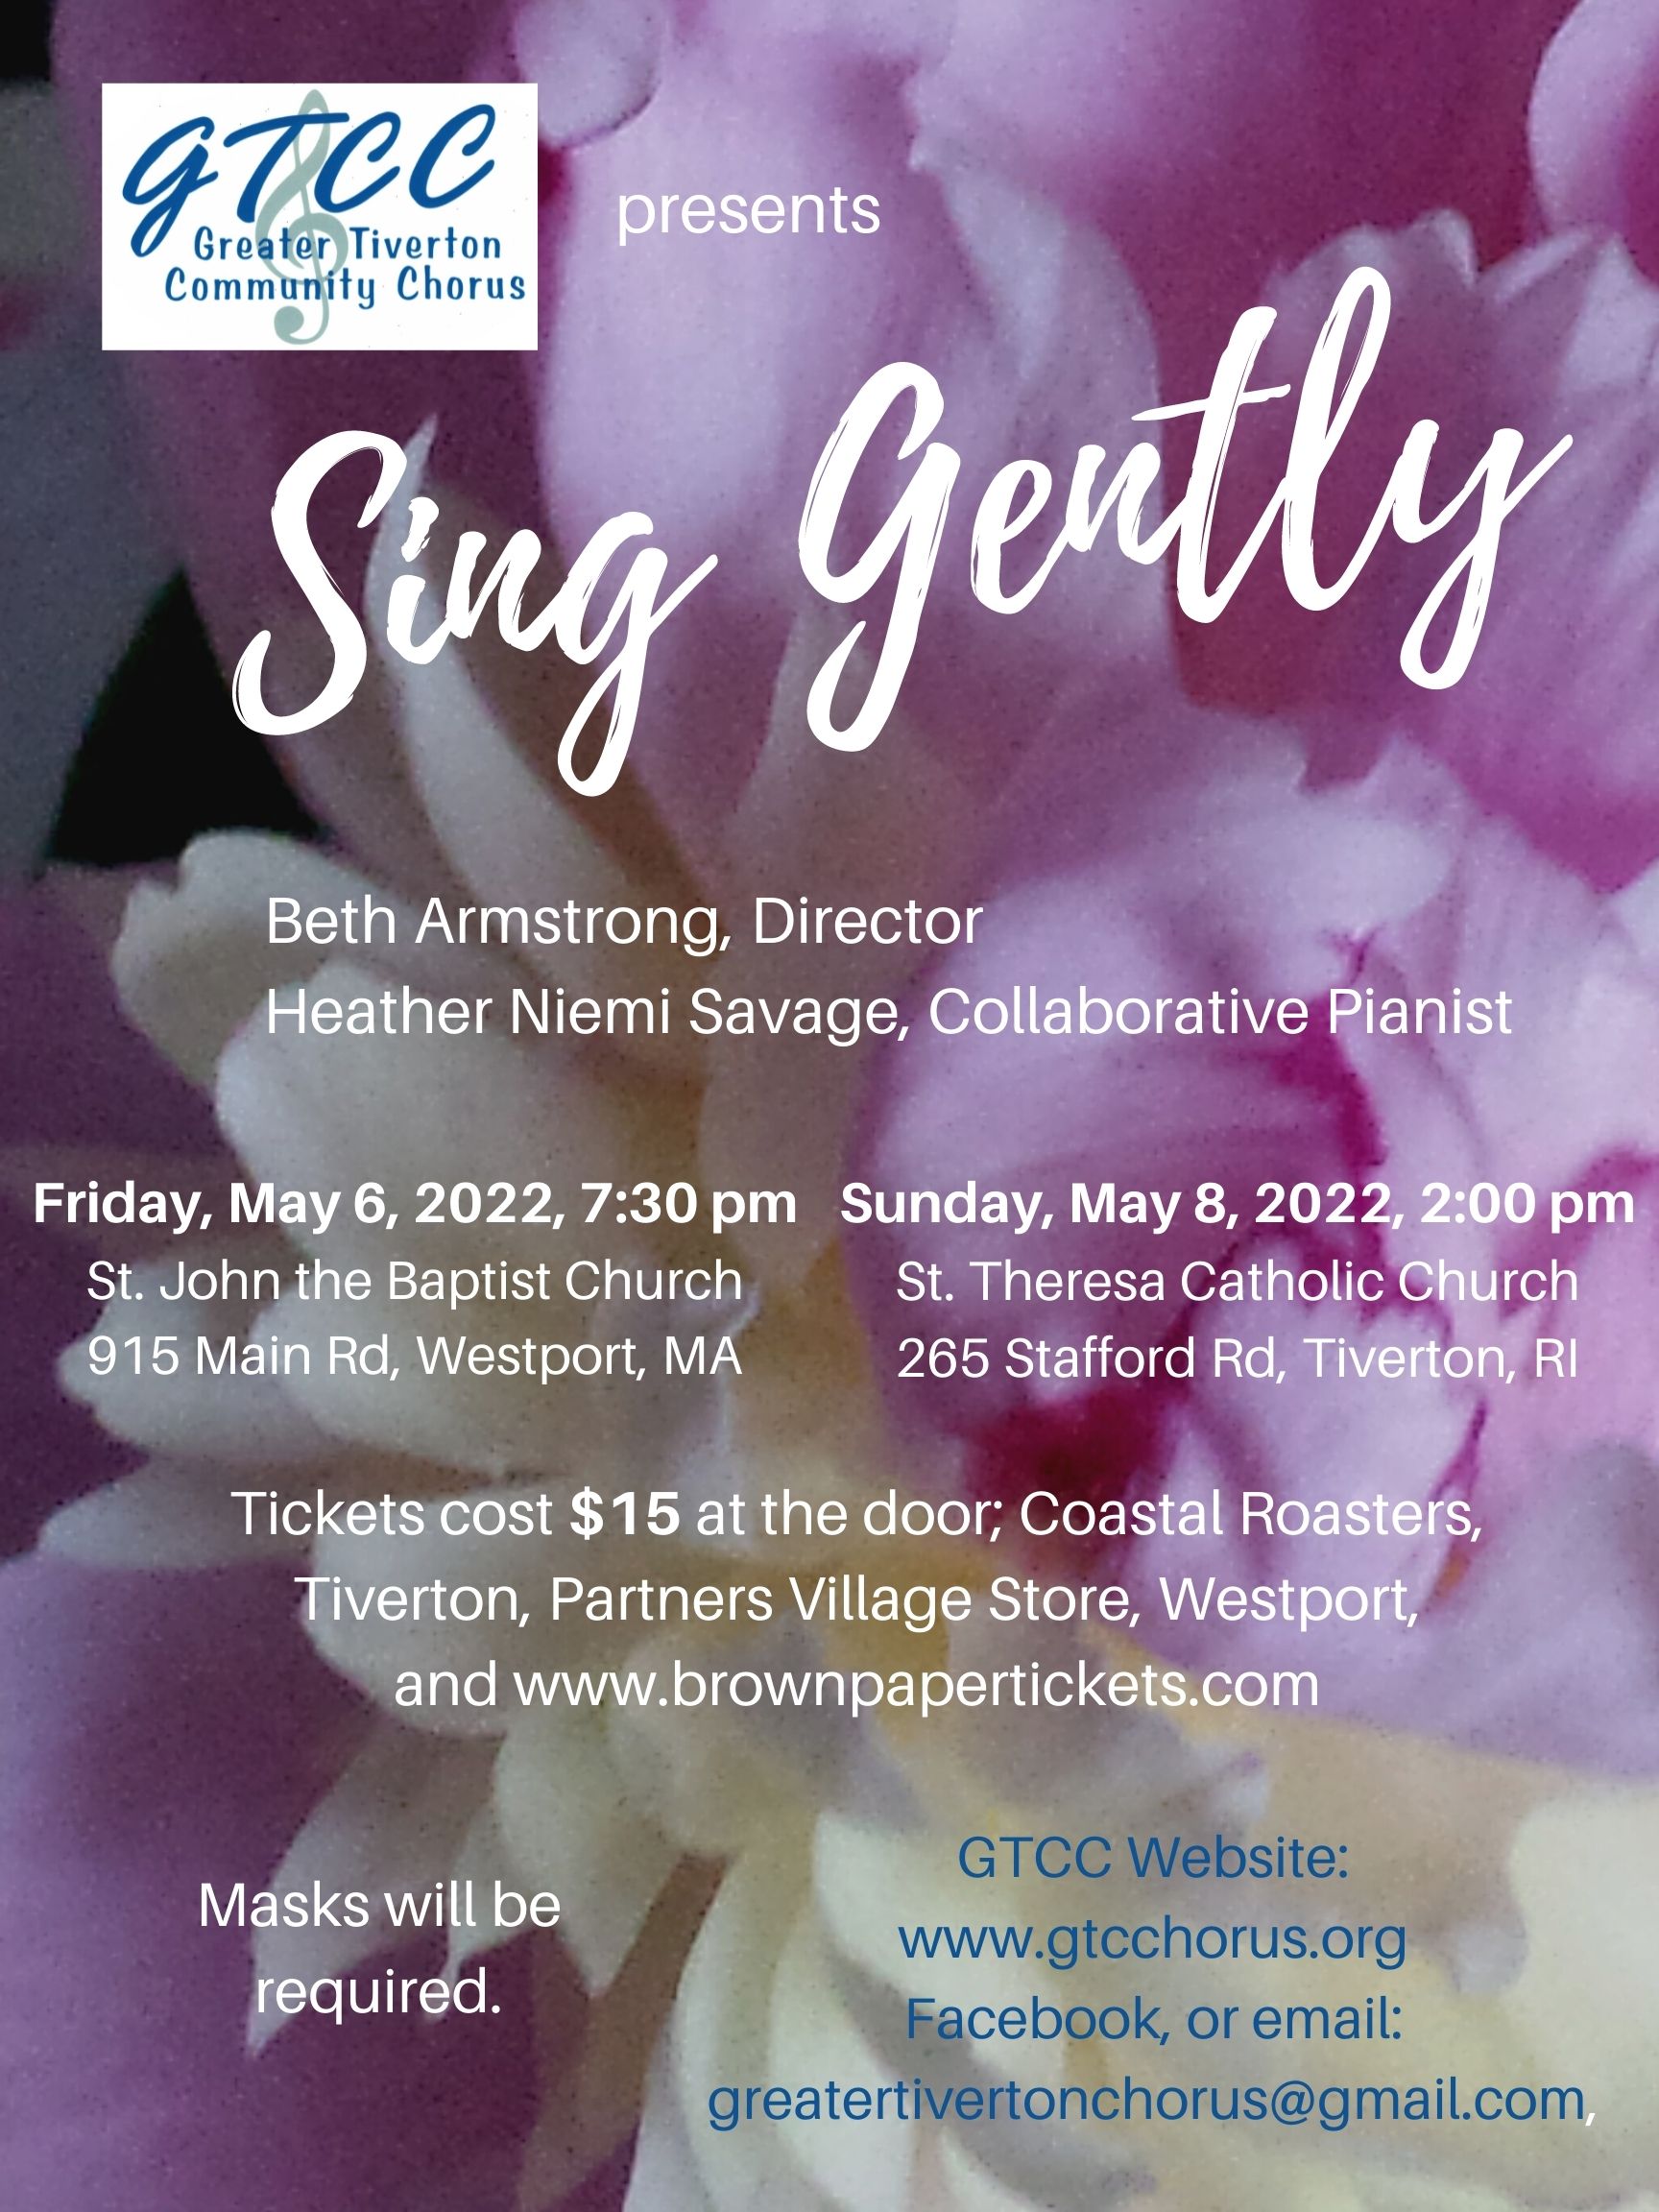 Poster for the Greater Tiverton Community Chorus Spring 2022 Concert: Sing Gently